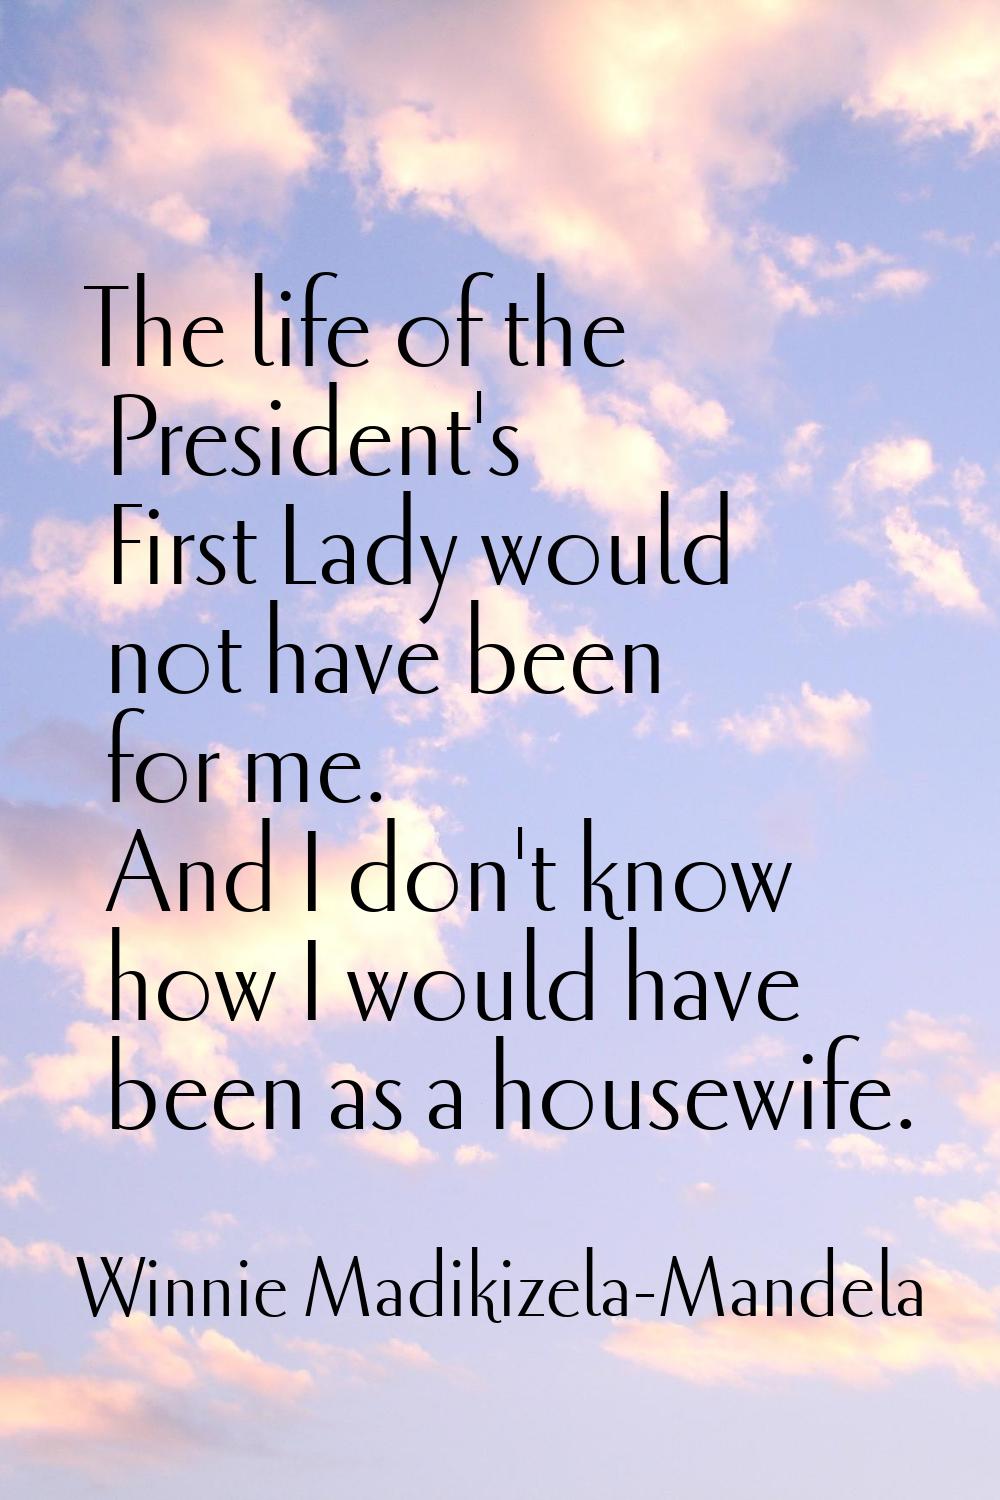 The life of the President's First Lady would not have been for me. And I don't know how I would hav